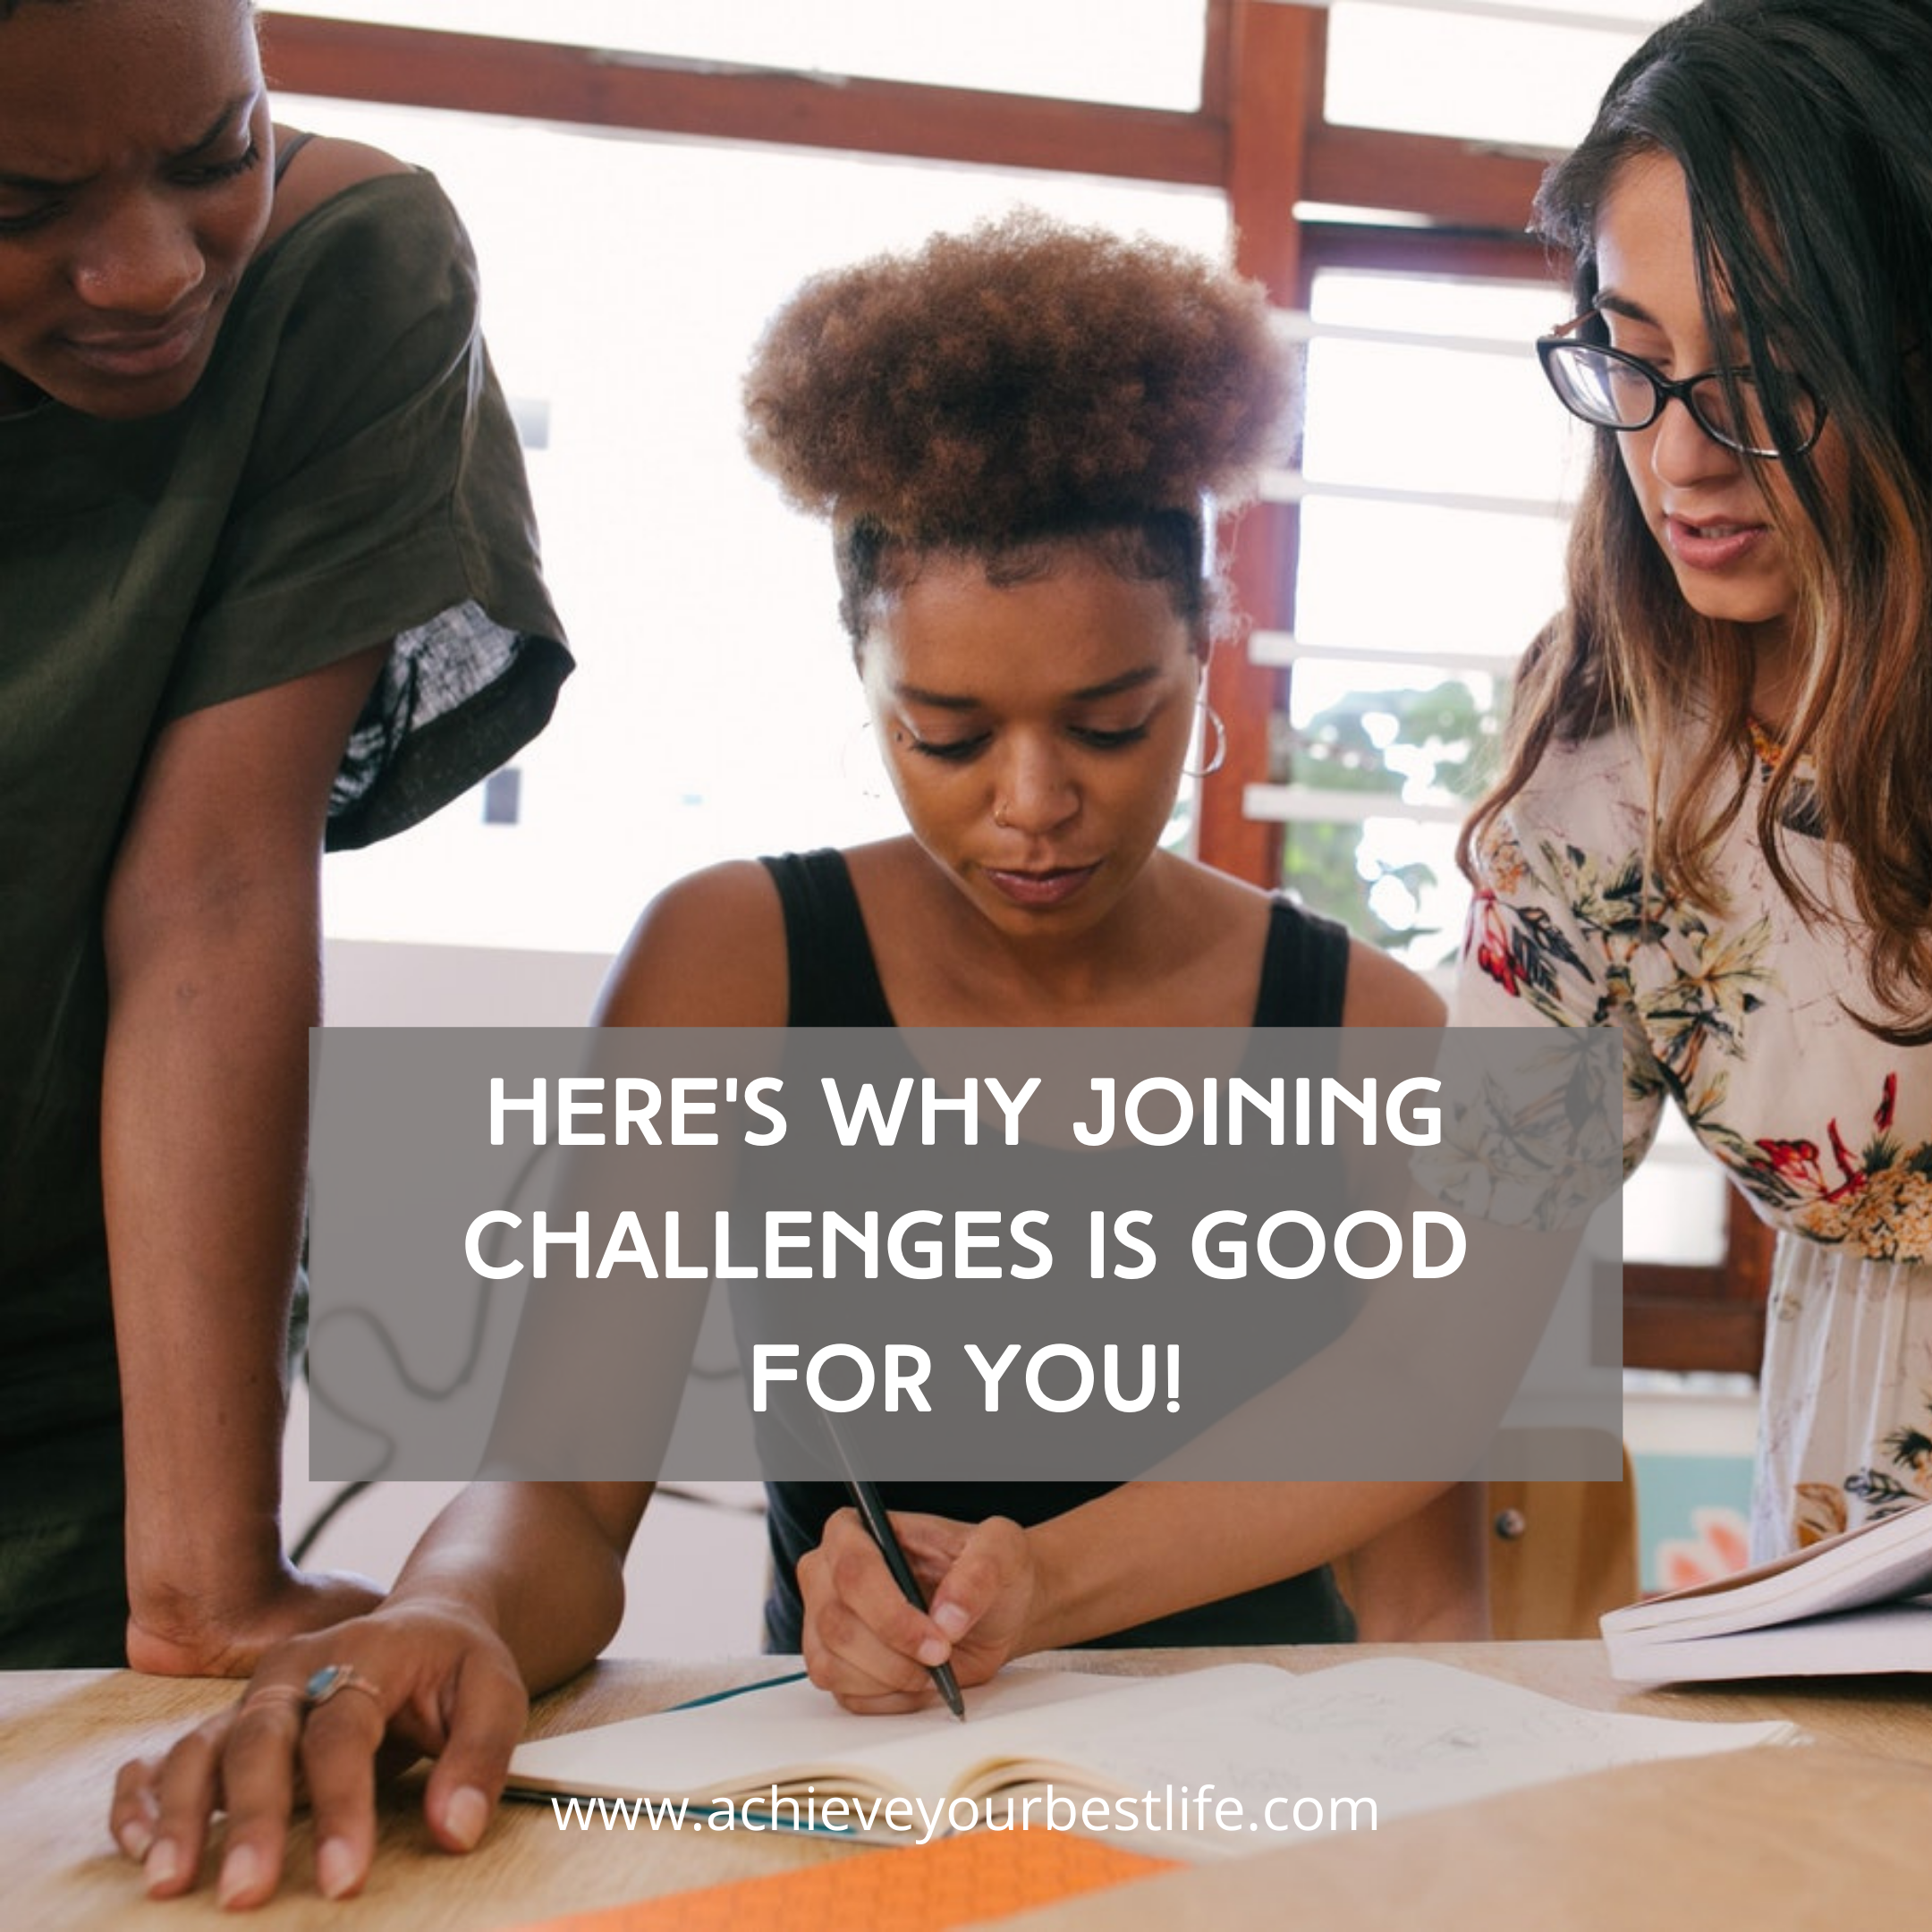 Here’s Why Joining Challenges Is Good For You!